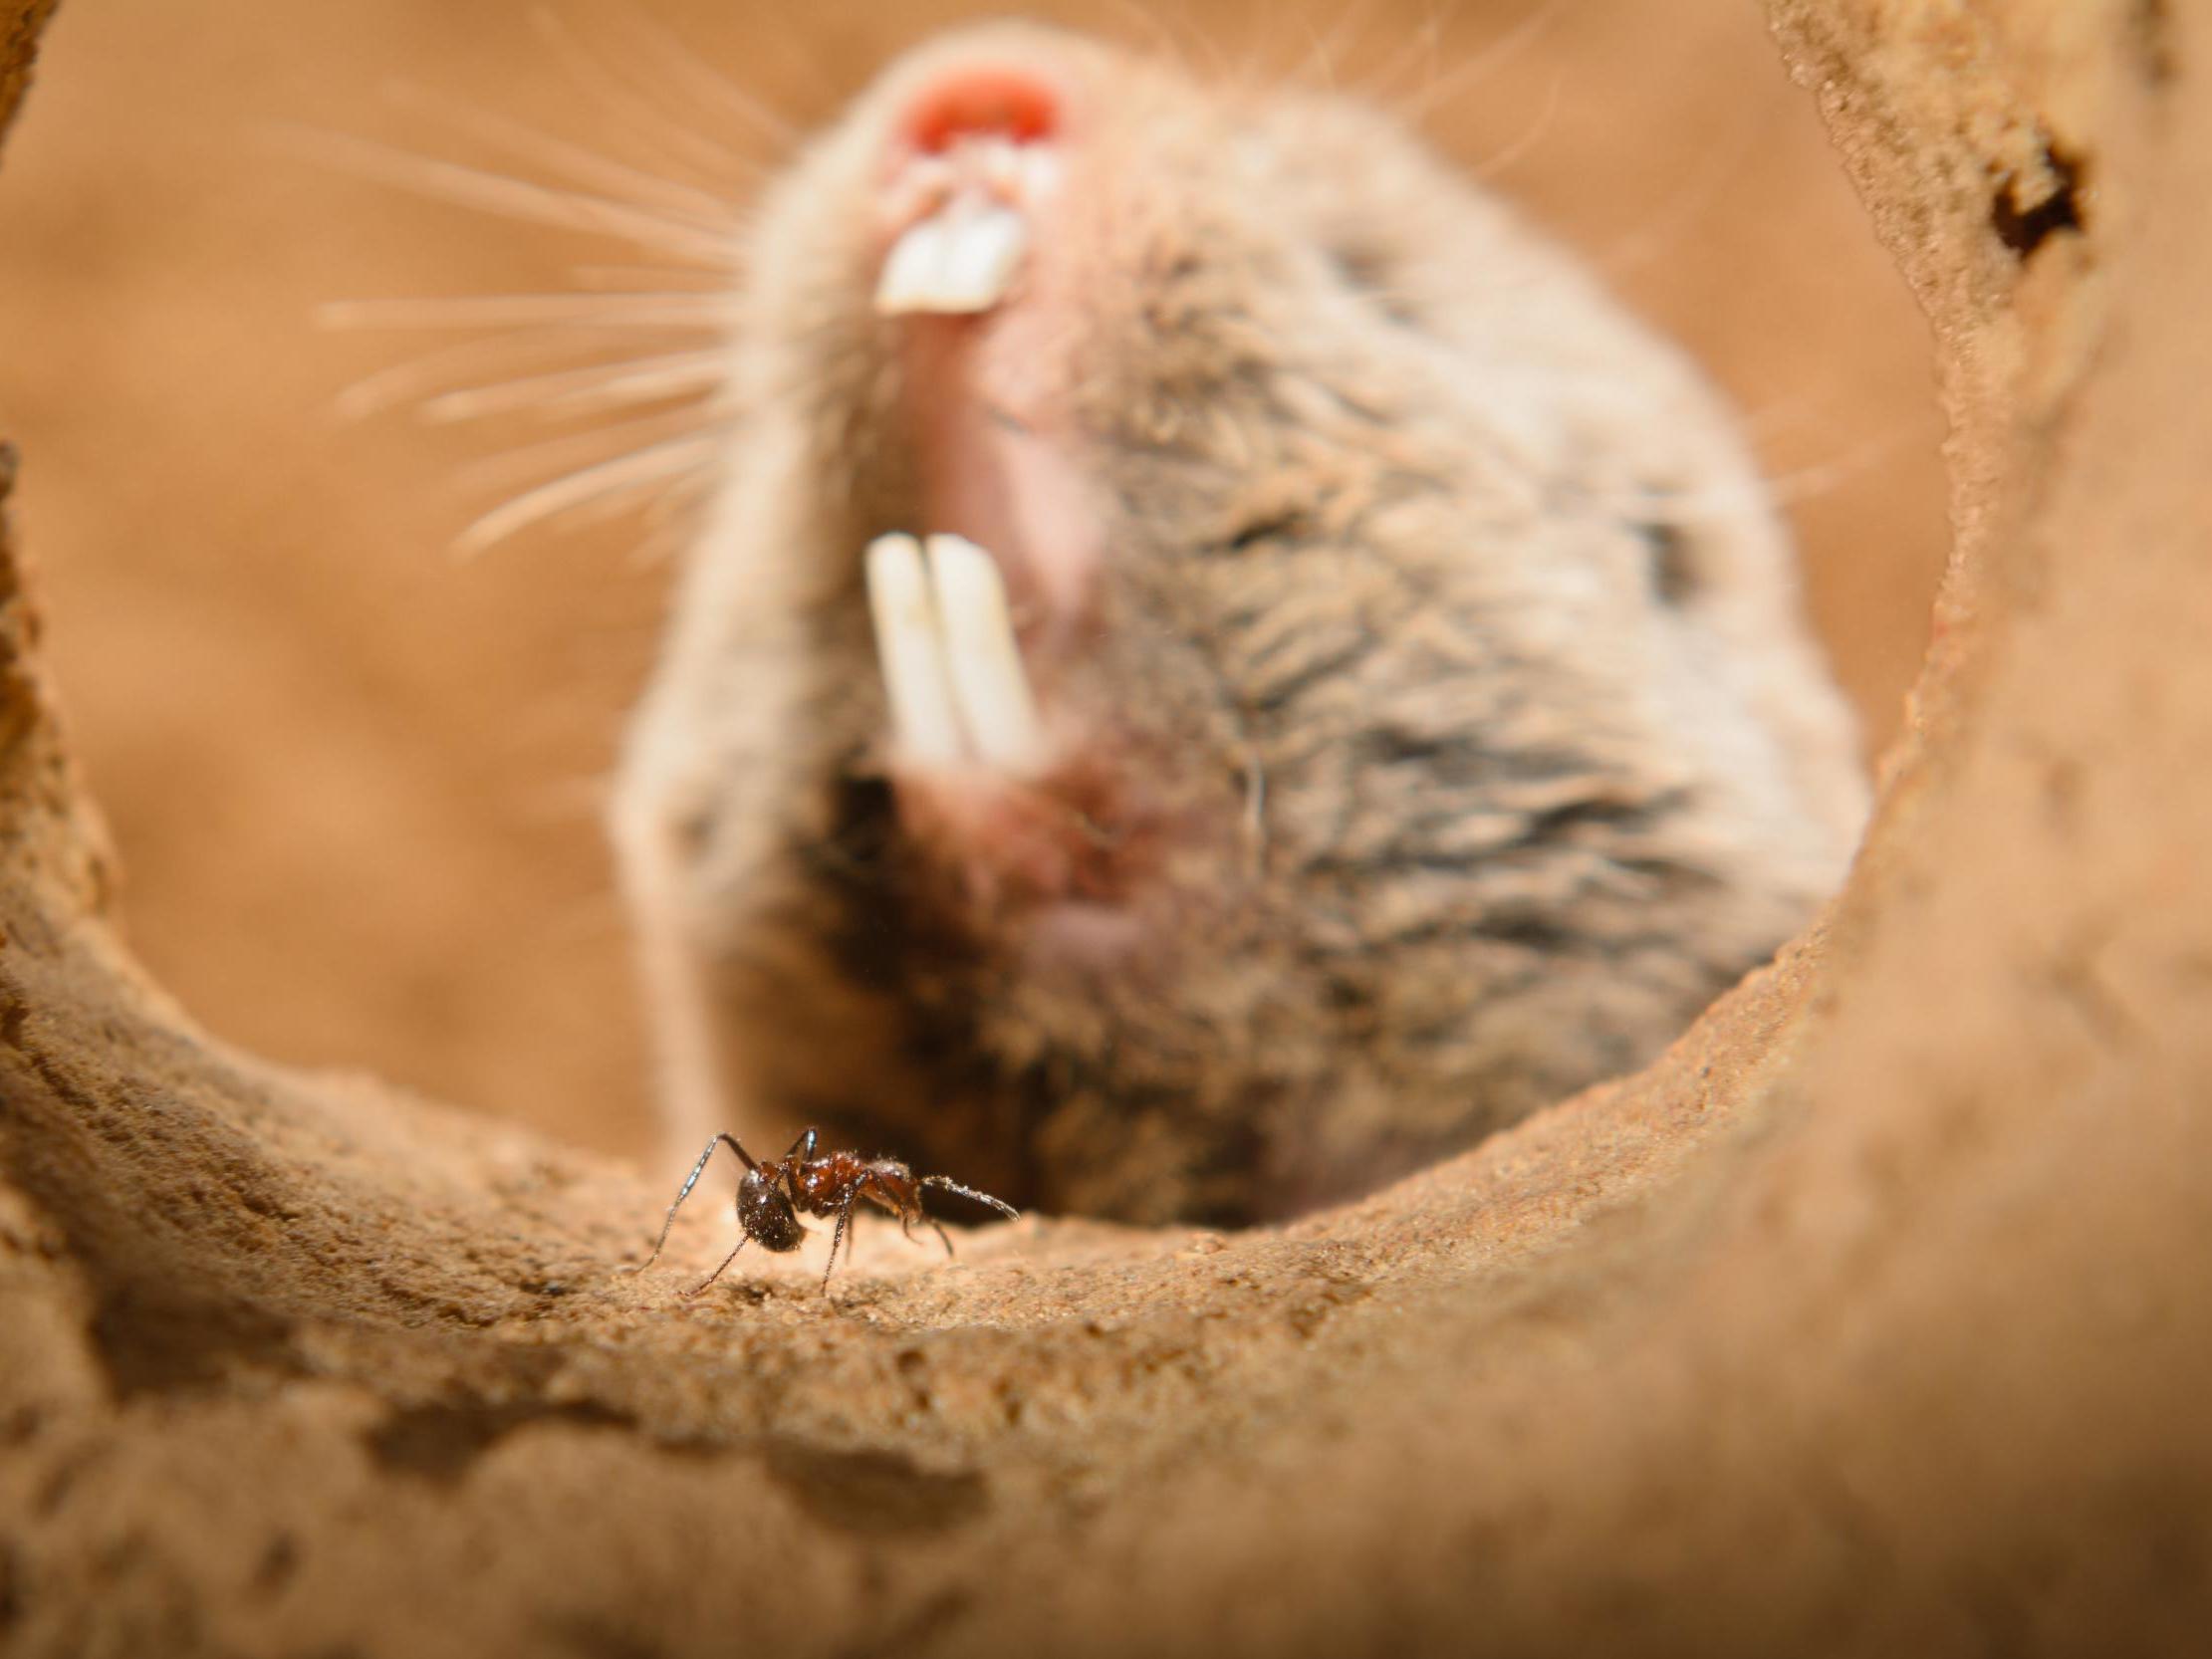 Highveld mole-rats (pictured) often share their burrows with venomous ants but have evolved not to feel their sting